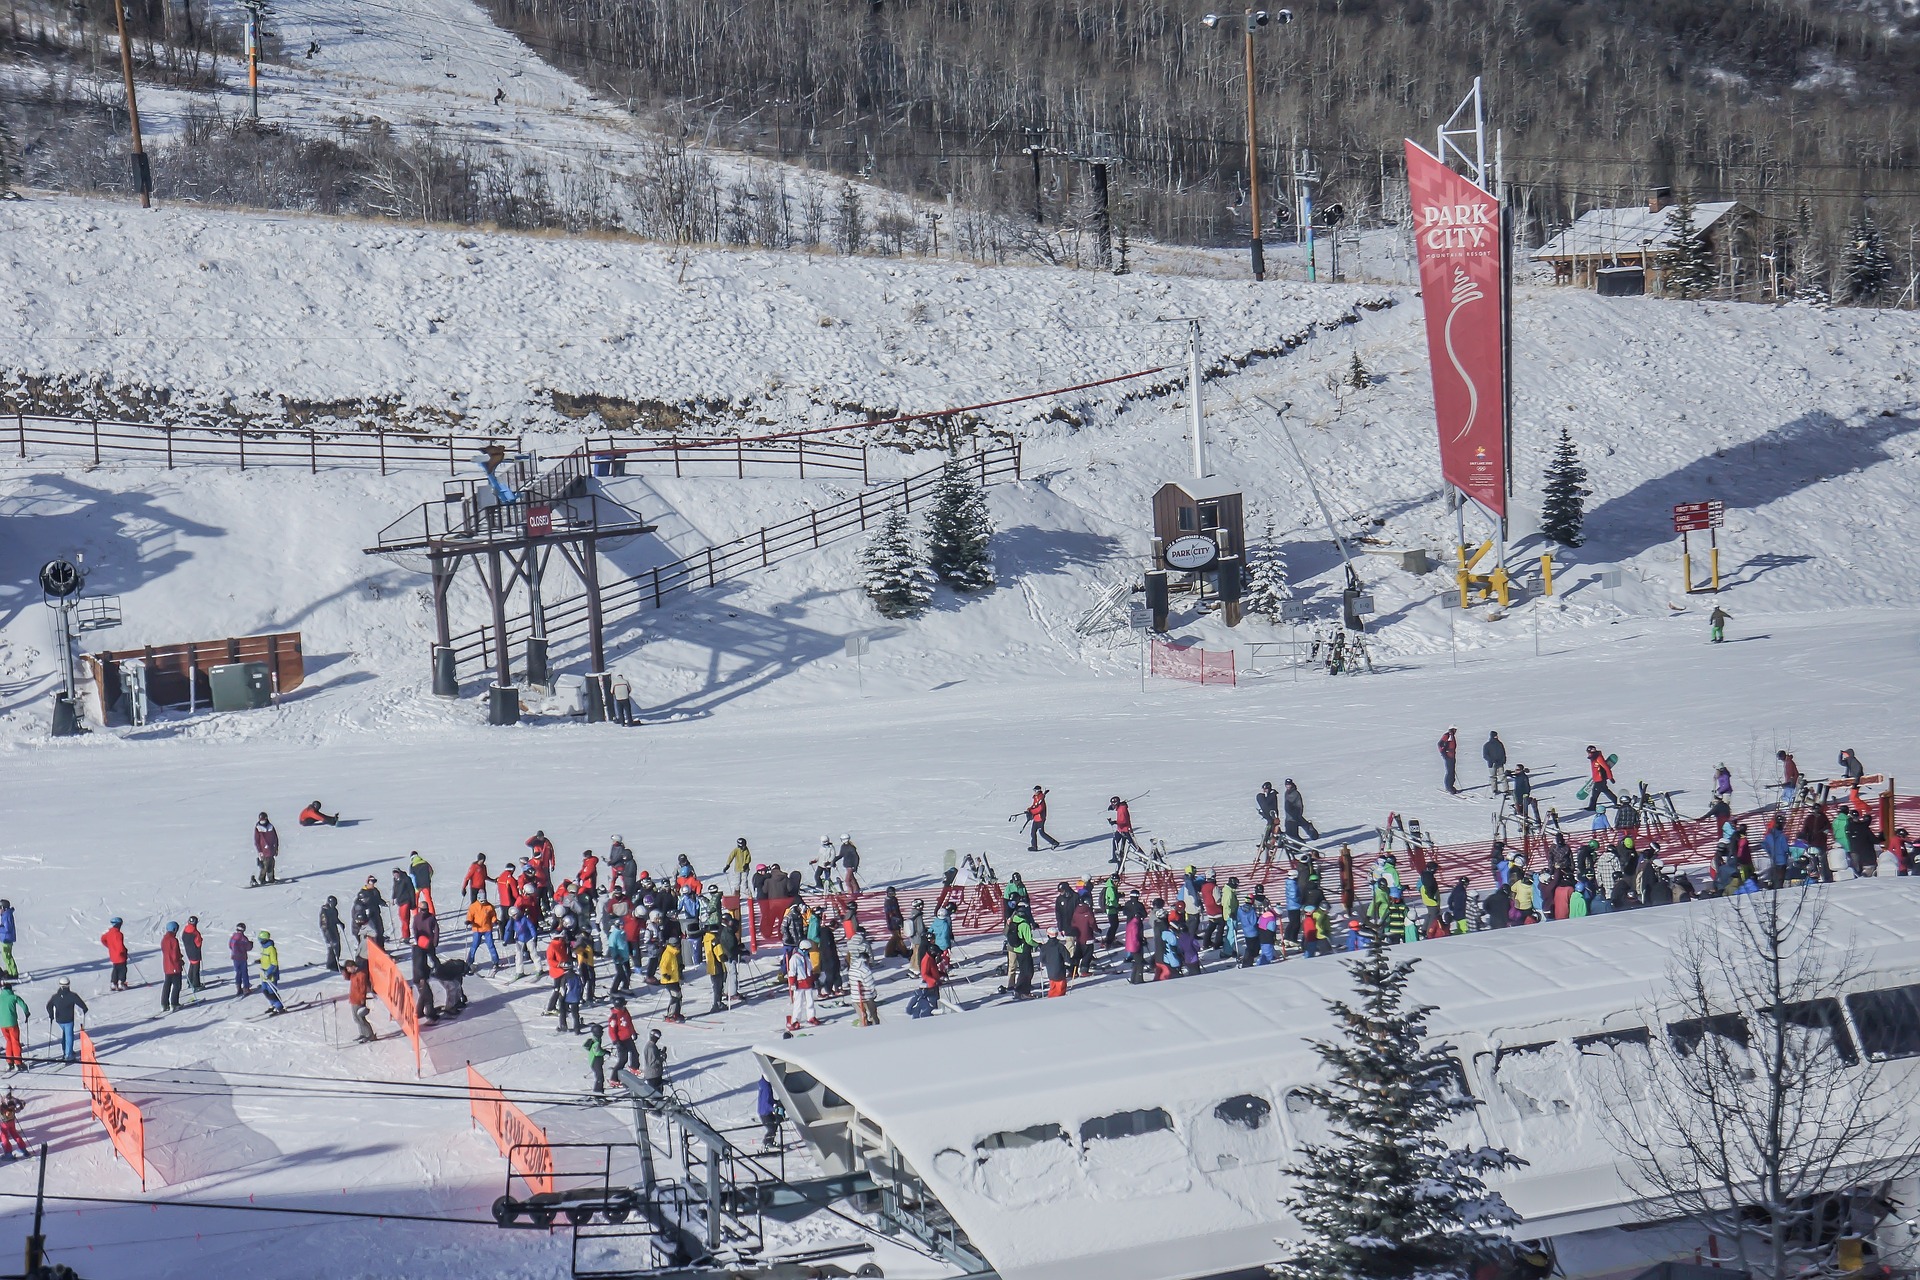 With two Park City ski resorts available, you'll always have new runs to try!